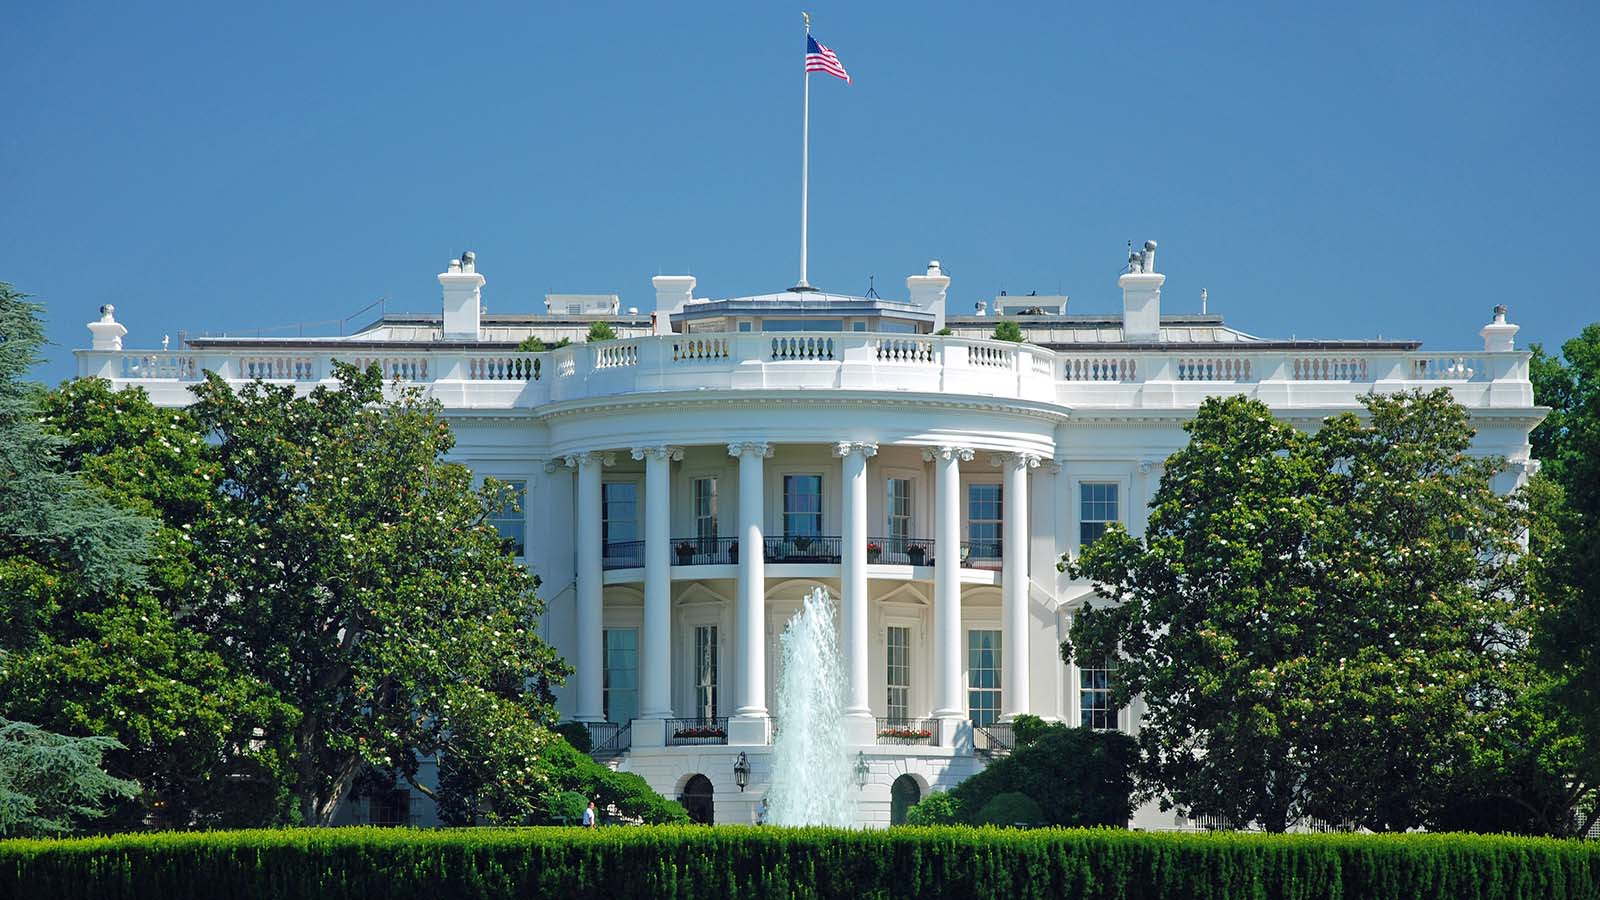 Can You Pass This 40-Question Geography Test That Gets Progressively Harder With Each Question? White House, Washington, D.C., United States